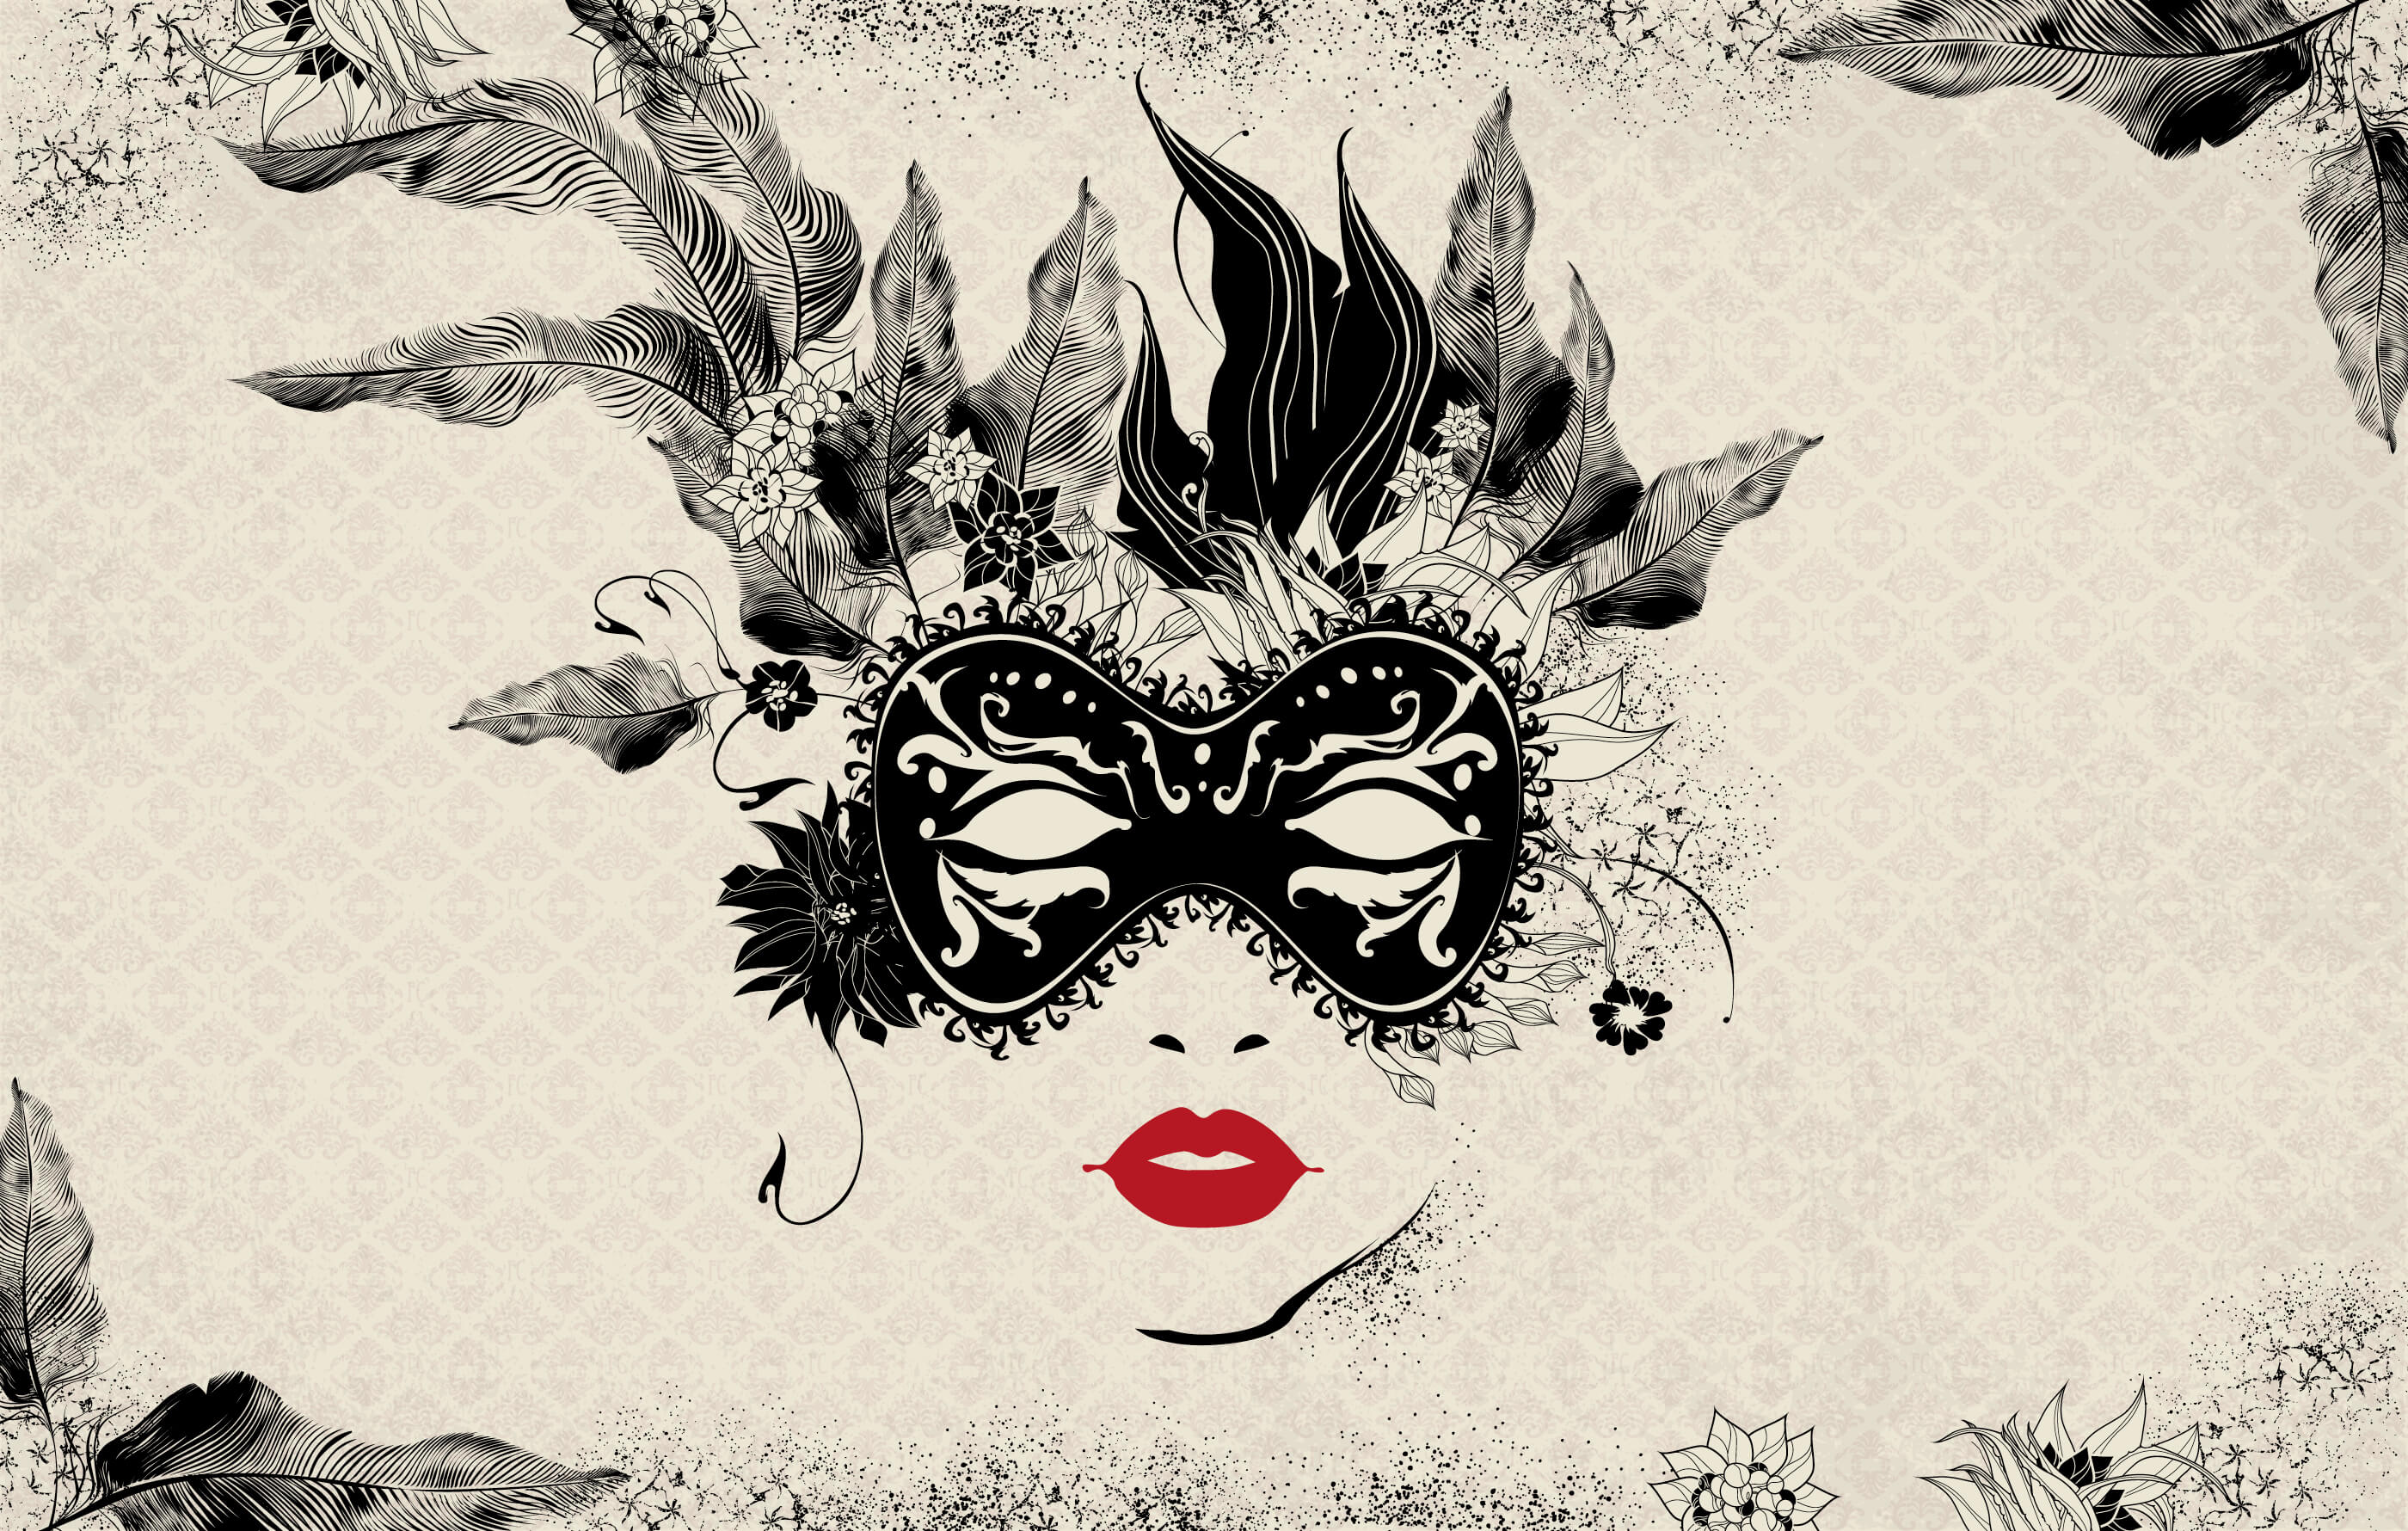 Hand drawn illustration of a masked female face on a beige patterned background, all in black ink apart from her deep red lips